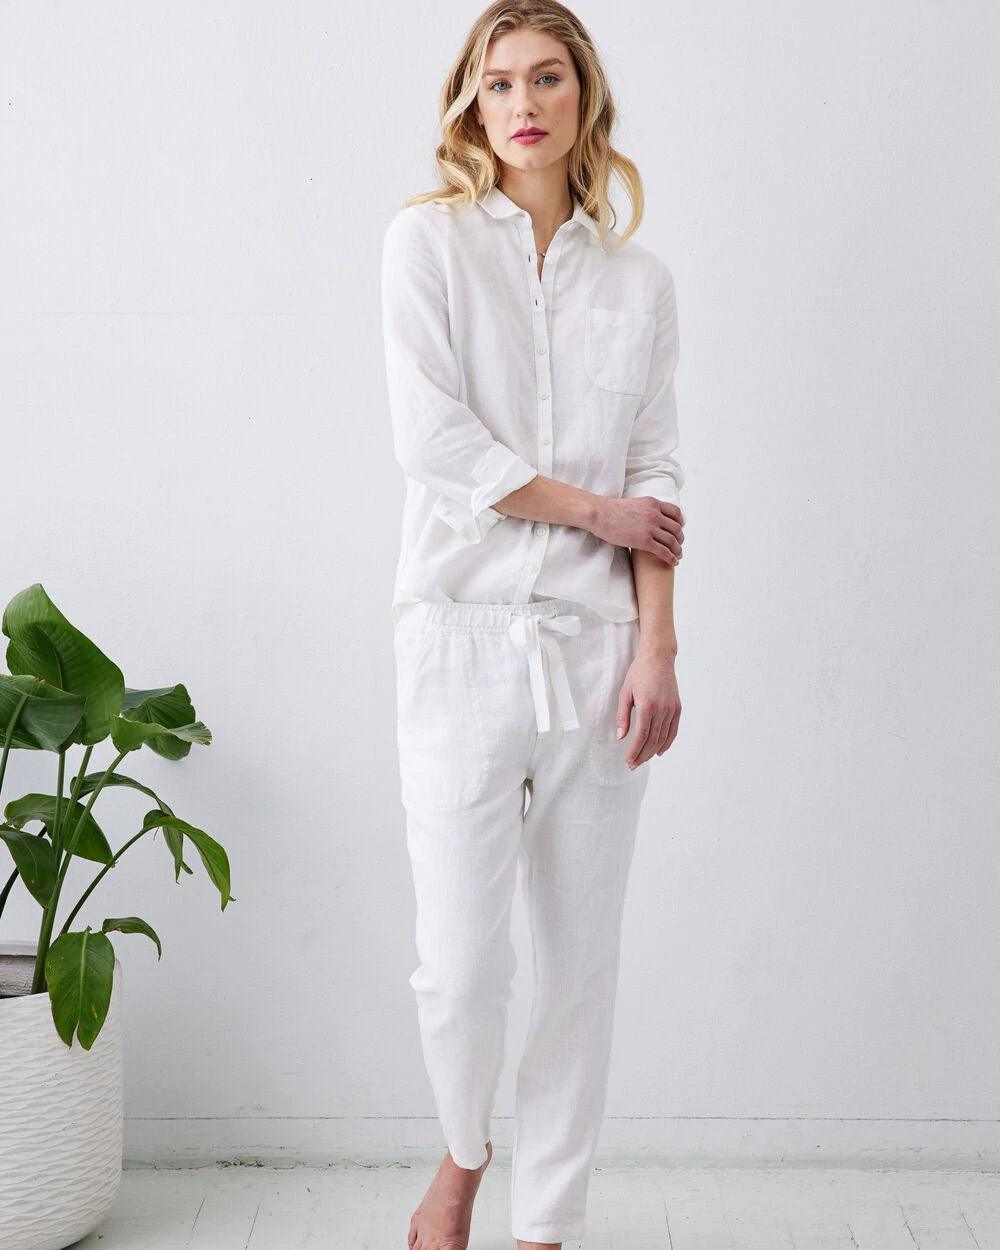 Kennedy Linen Shirt by Not Monday - Haven